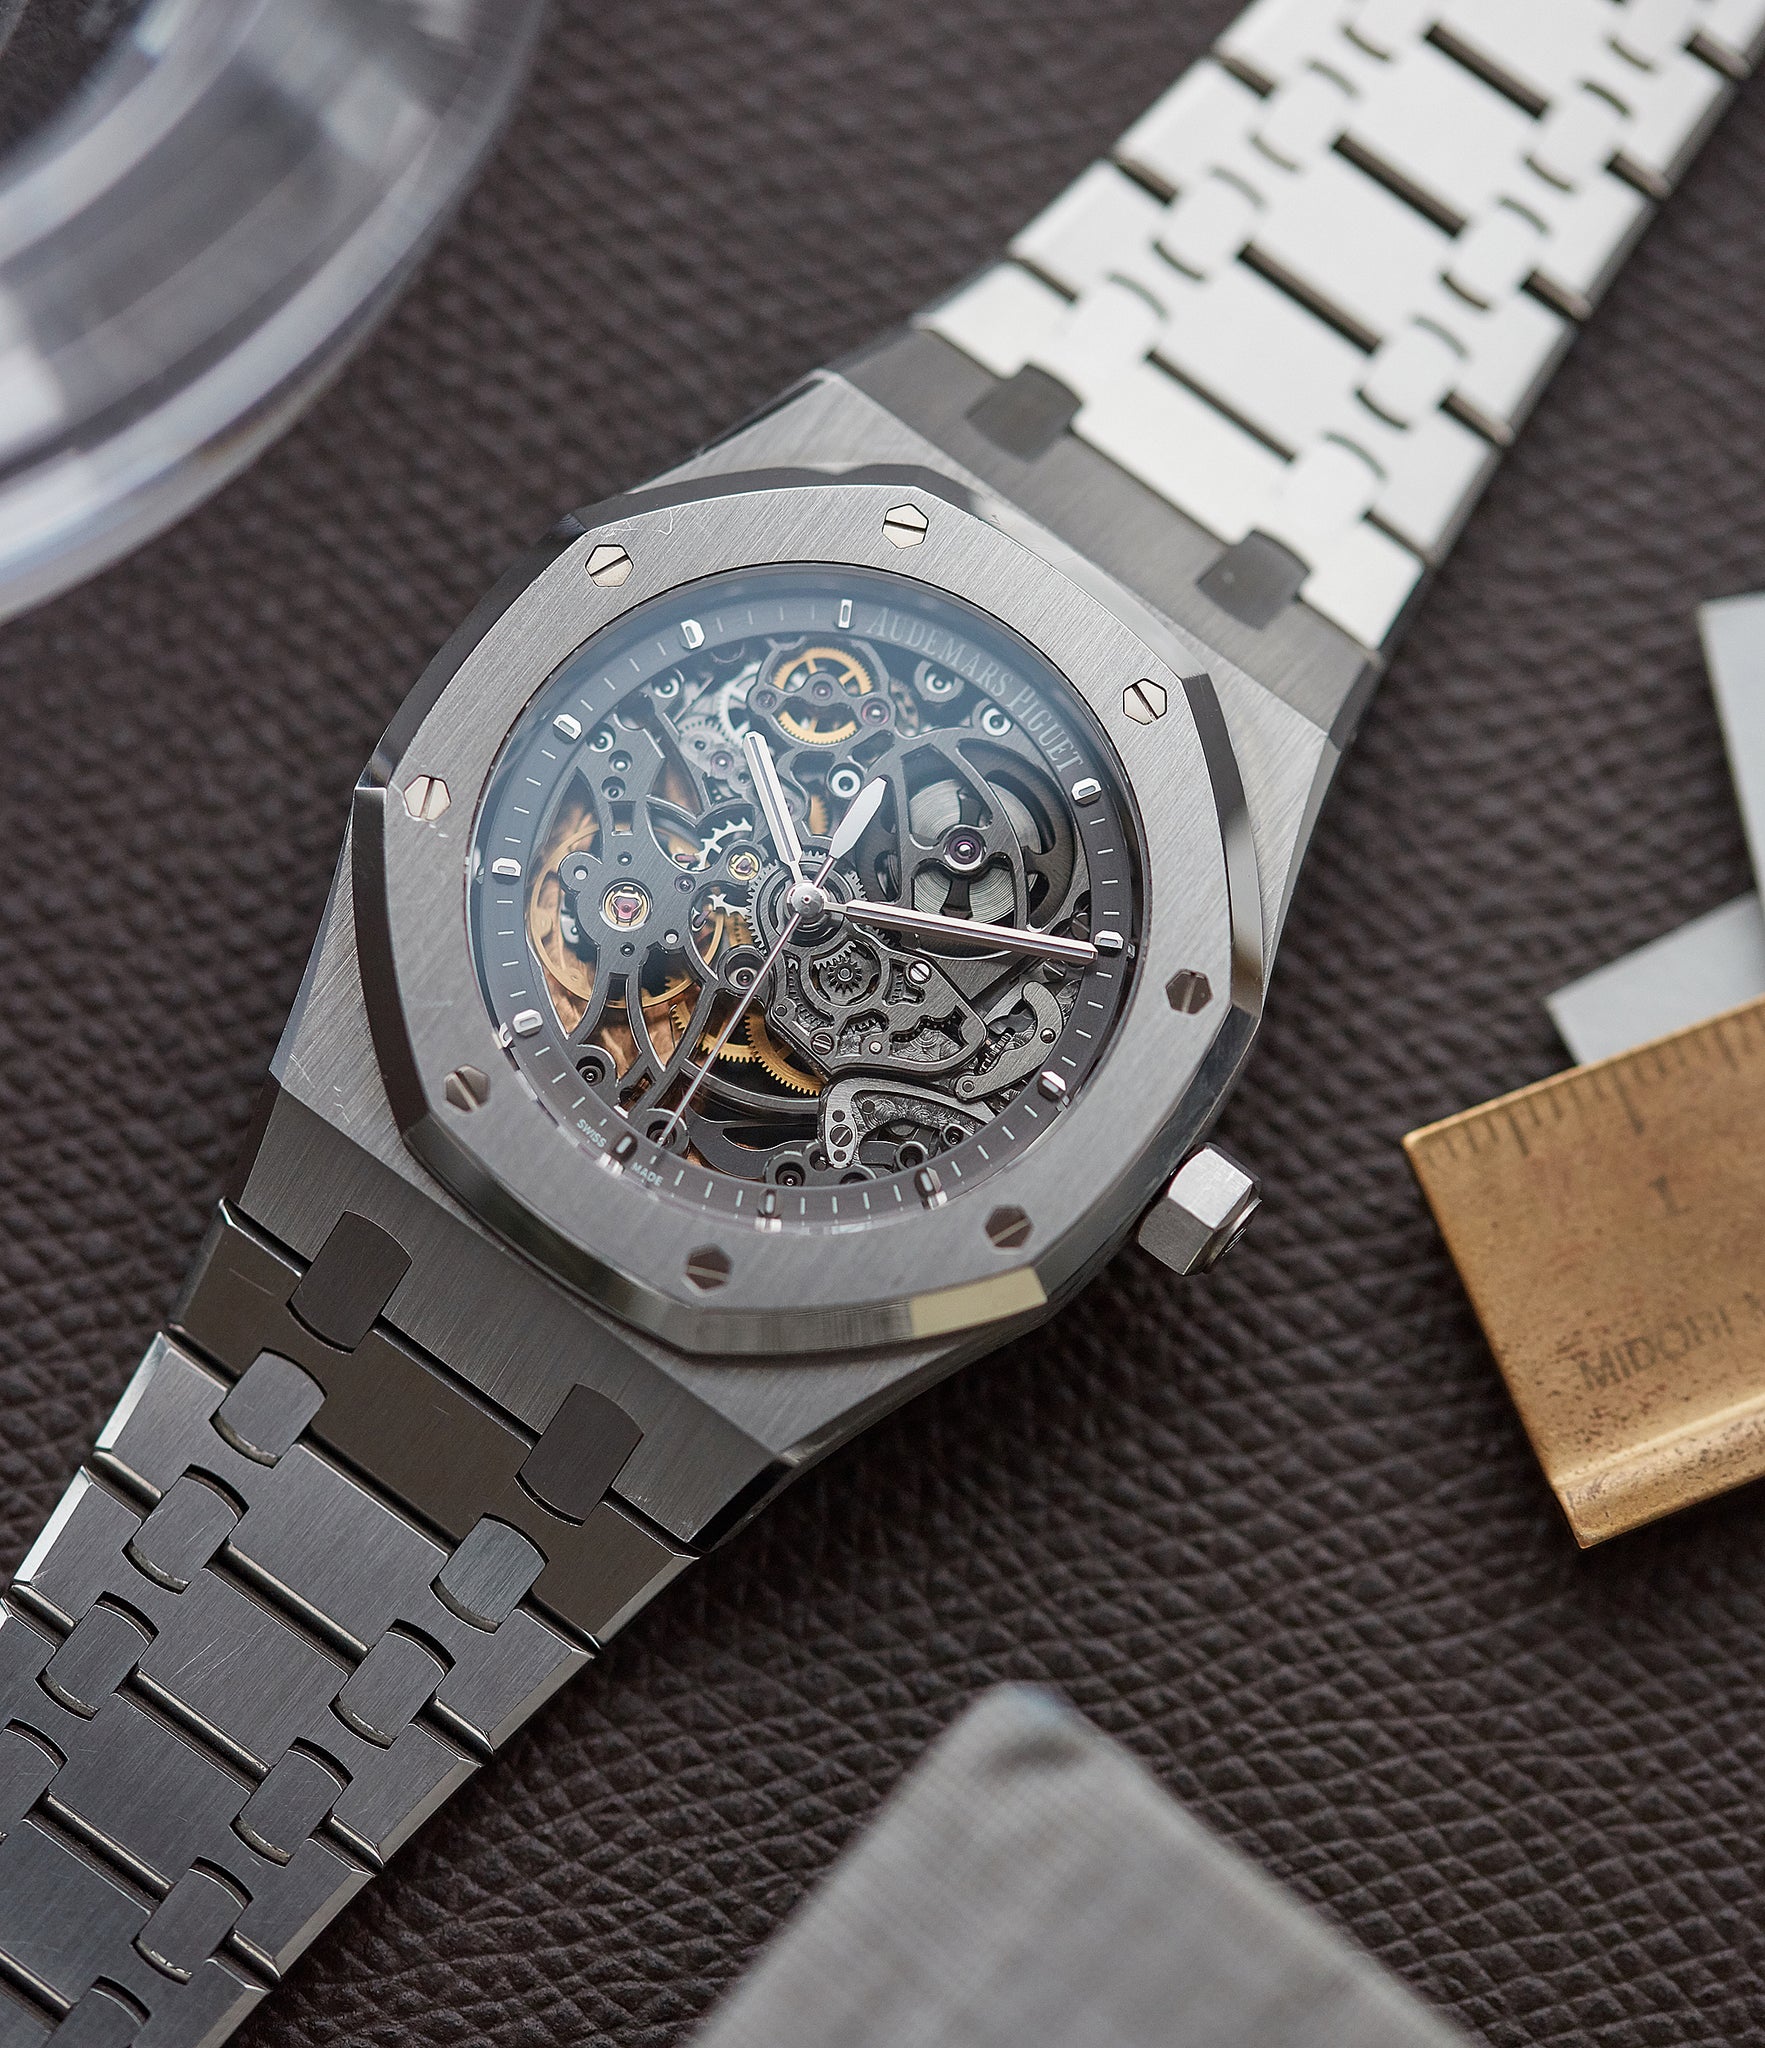 Audemars Piguet Royal Oak skeletonised 15305ST steel watch for sale online at A Collected Man London UK specialist of rare watches